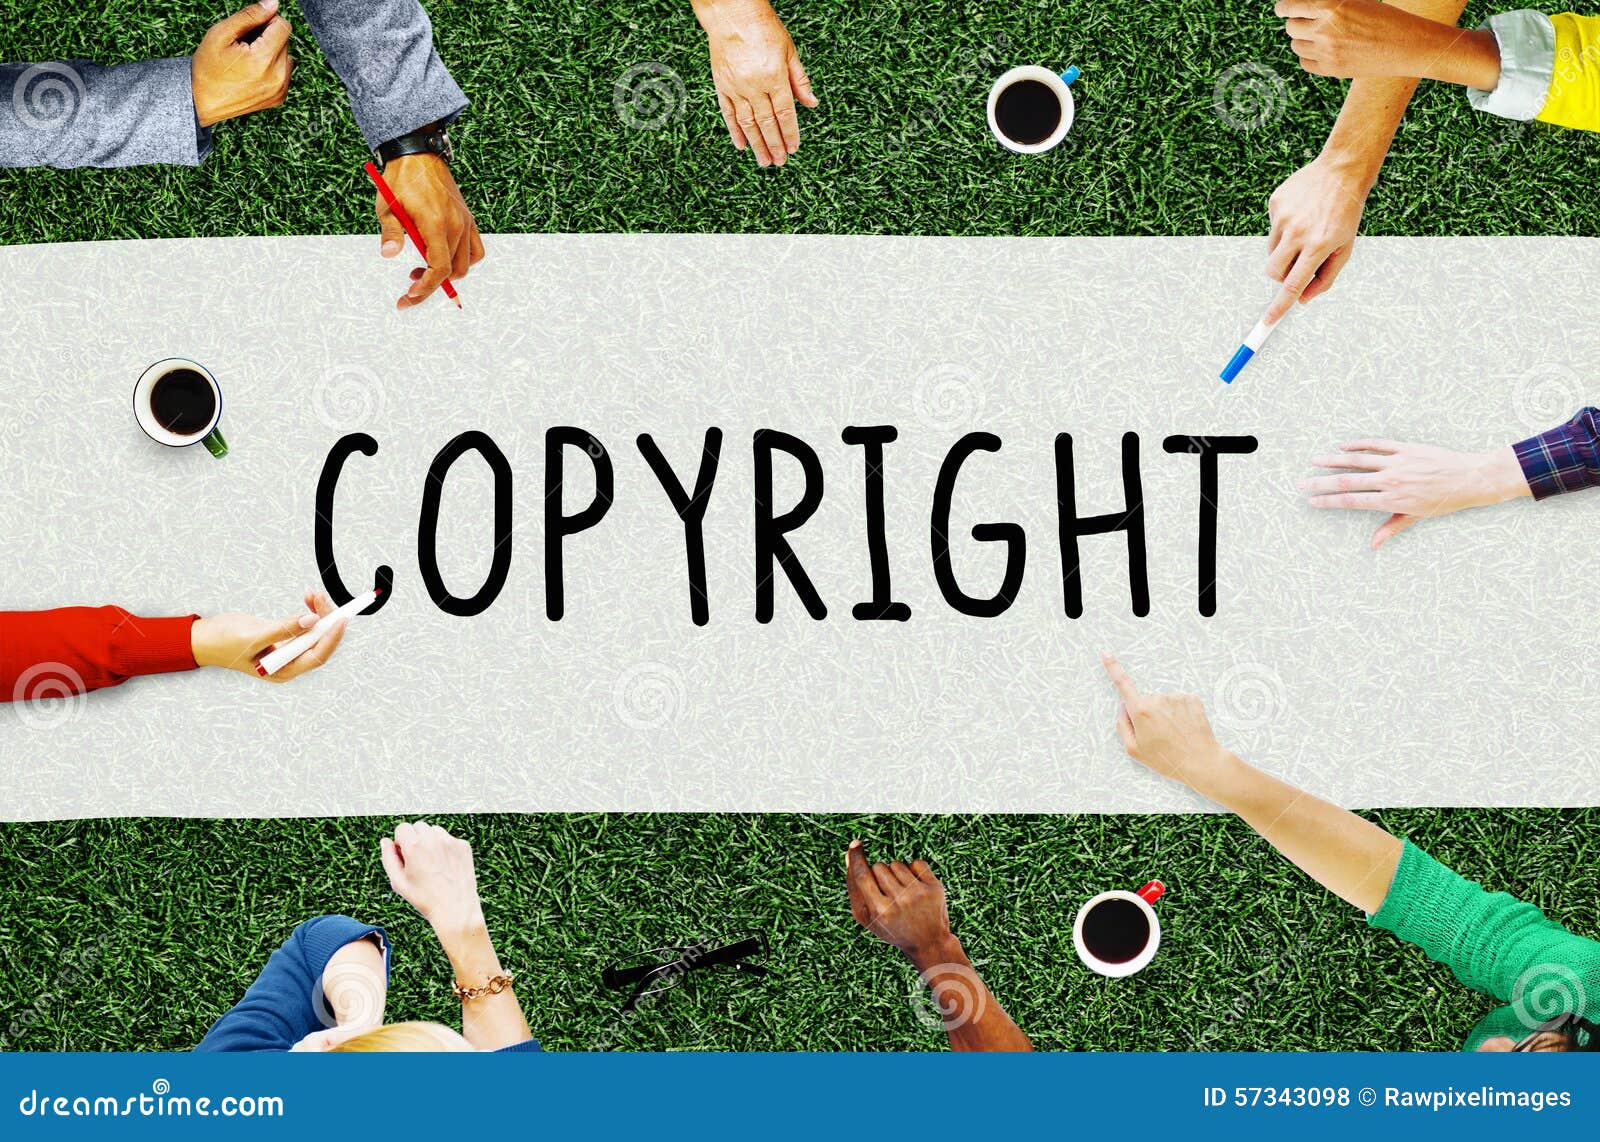 copyright trademark identity owner legal concept